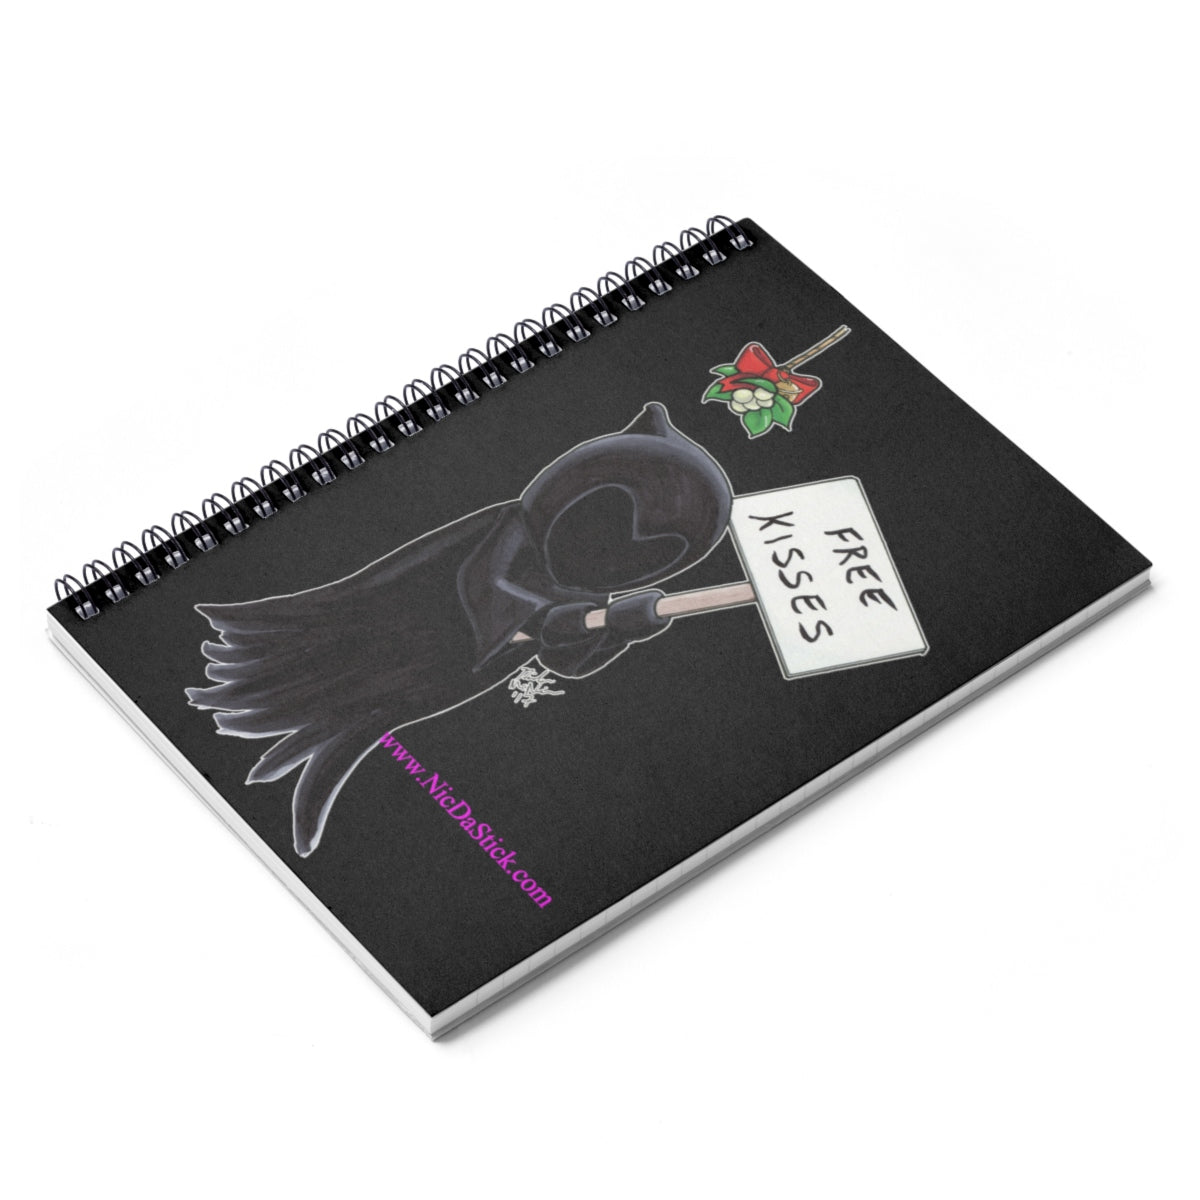 Free Kisses - Dementor Spiral Notebook - Ruled Line,Paper products - Nic Da Stick Creations